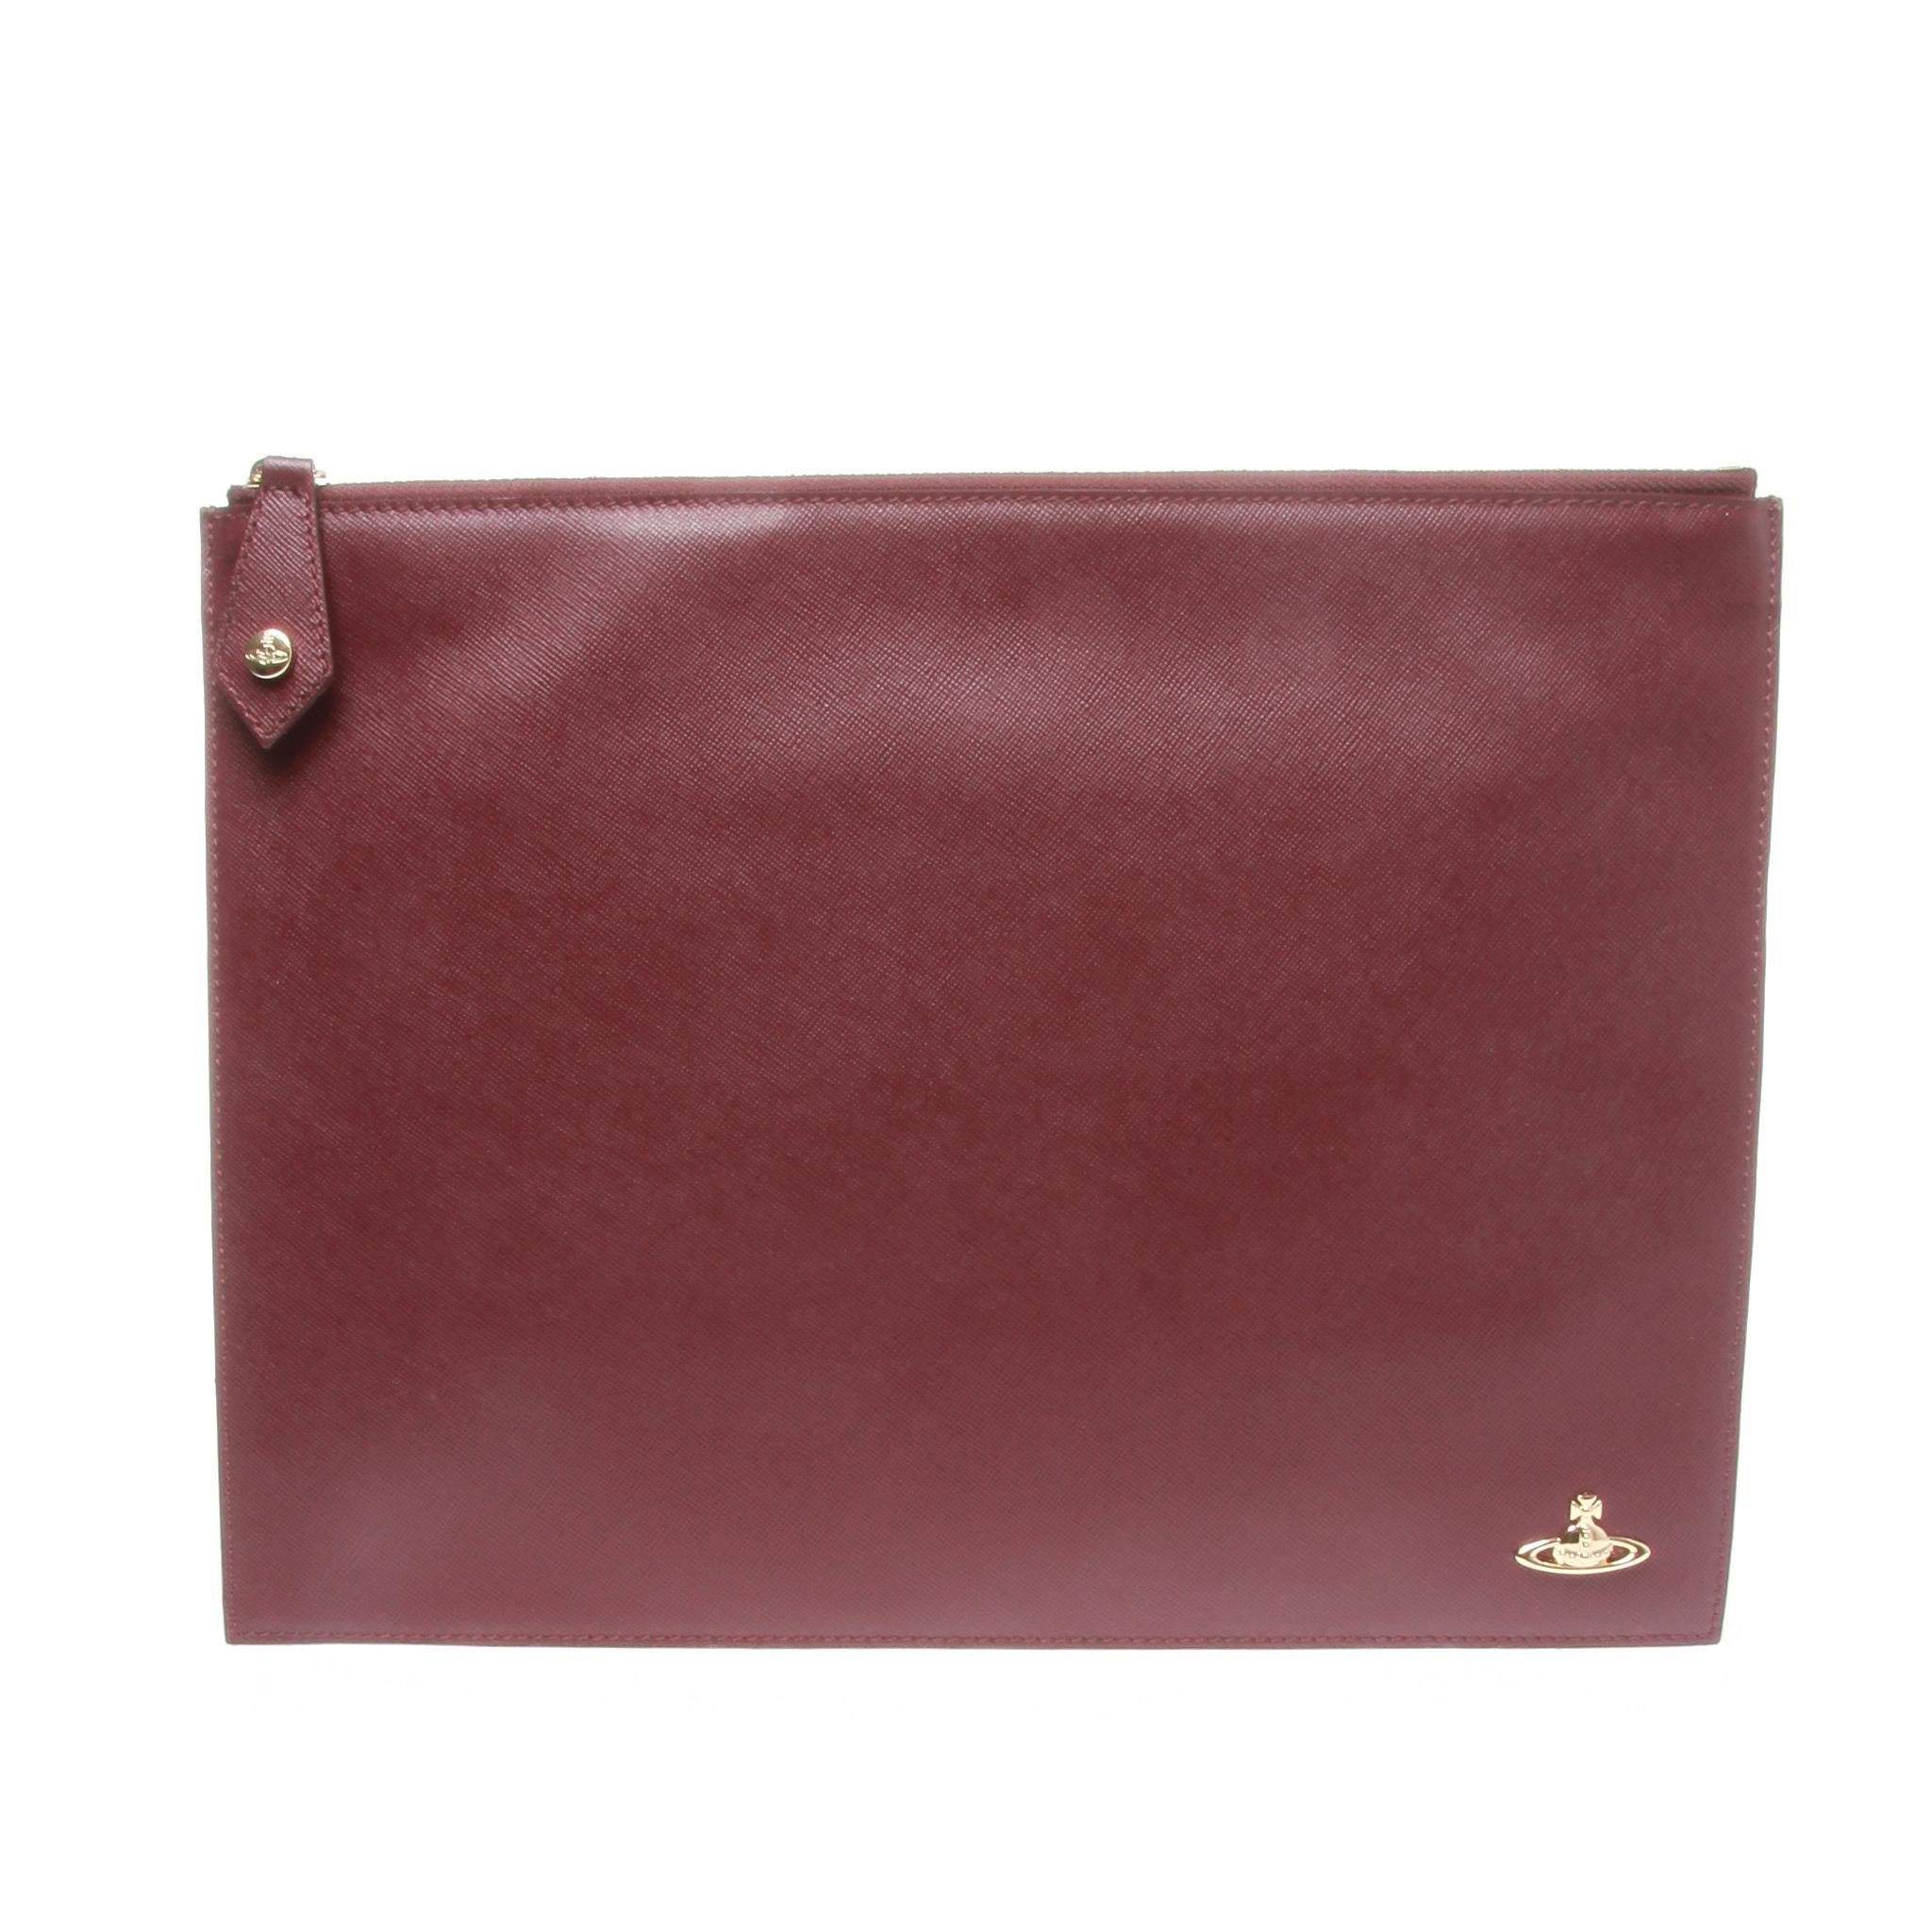 A stunning Vivienne Westwood women's Saffiano clutch bag.

Wonderful bordeaux envelope clutch from iconic British designer, Vivienne Westwood.

Crafted from textured Saffiano leather, the clutch bag features a zip around closure that opens to reveal